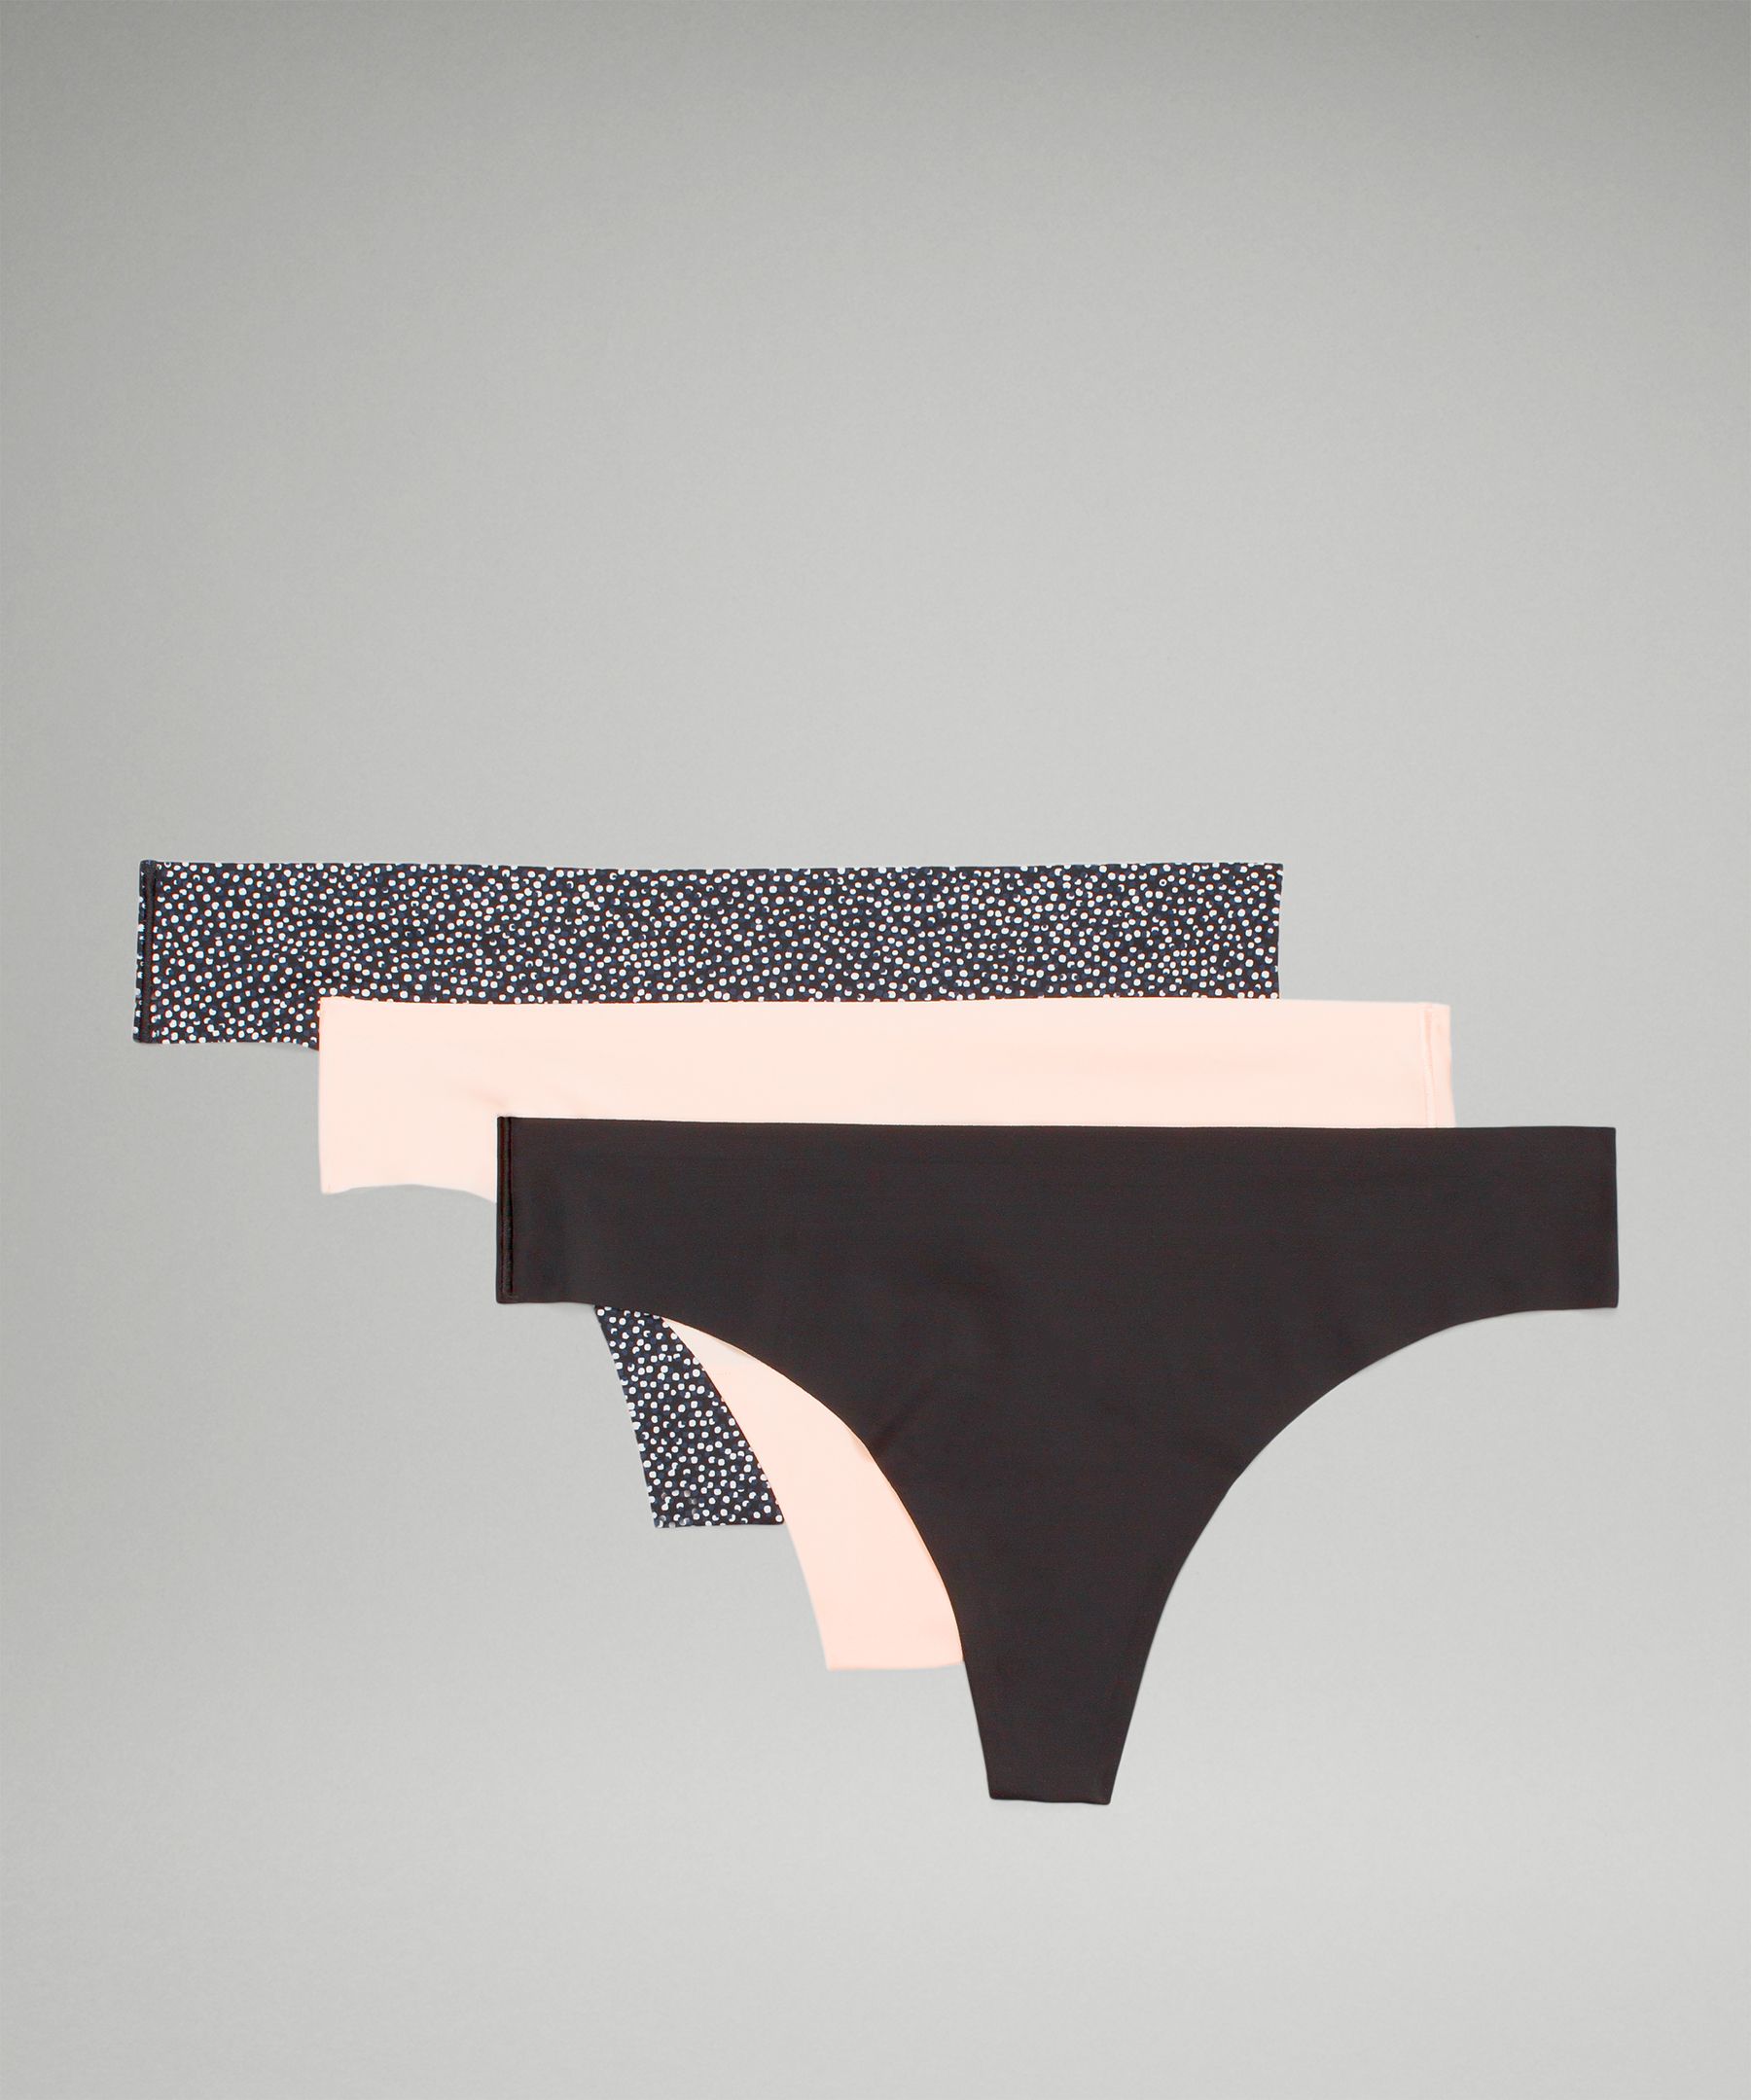 Lululemon Invisiwear Mid-rise Thong Underwear 3 Pack In Double Dimension Starlight Black/butter Pink/black